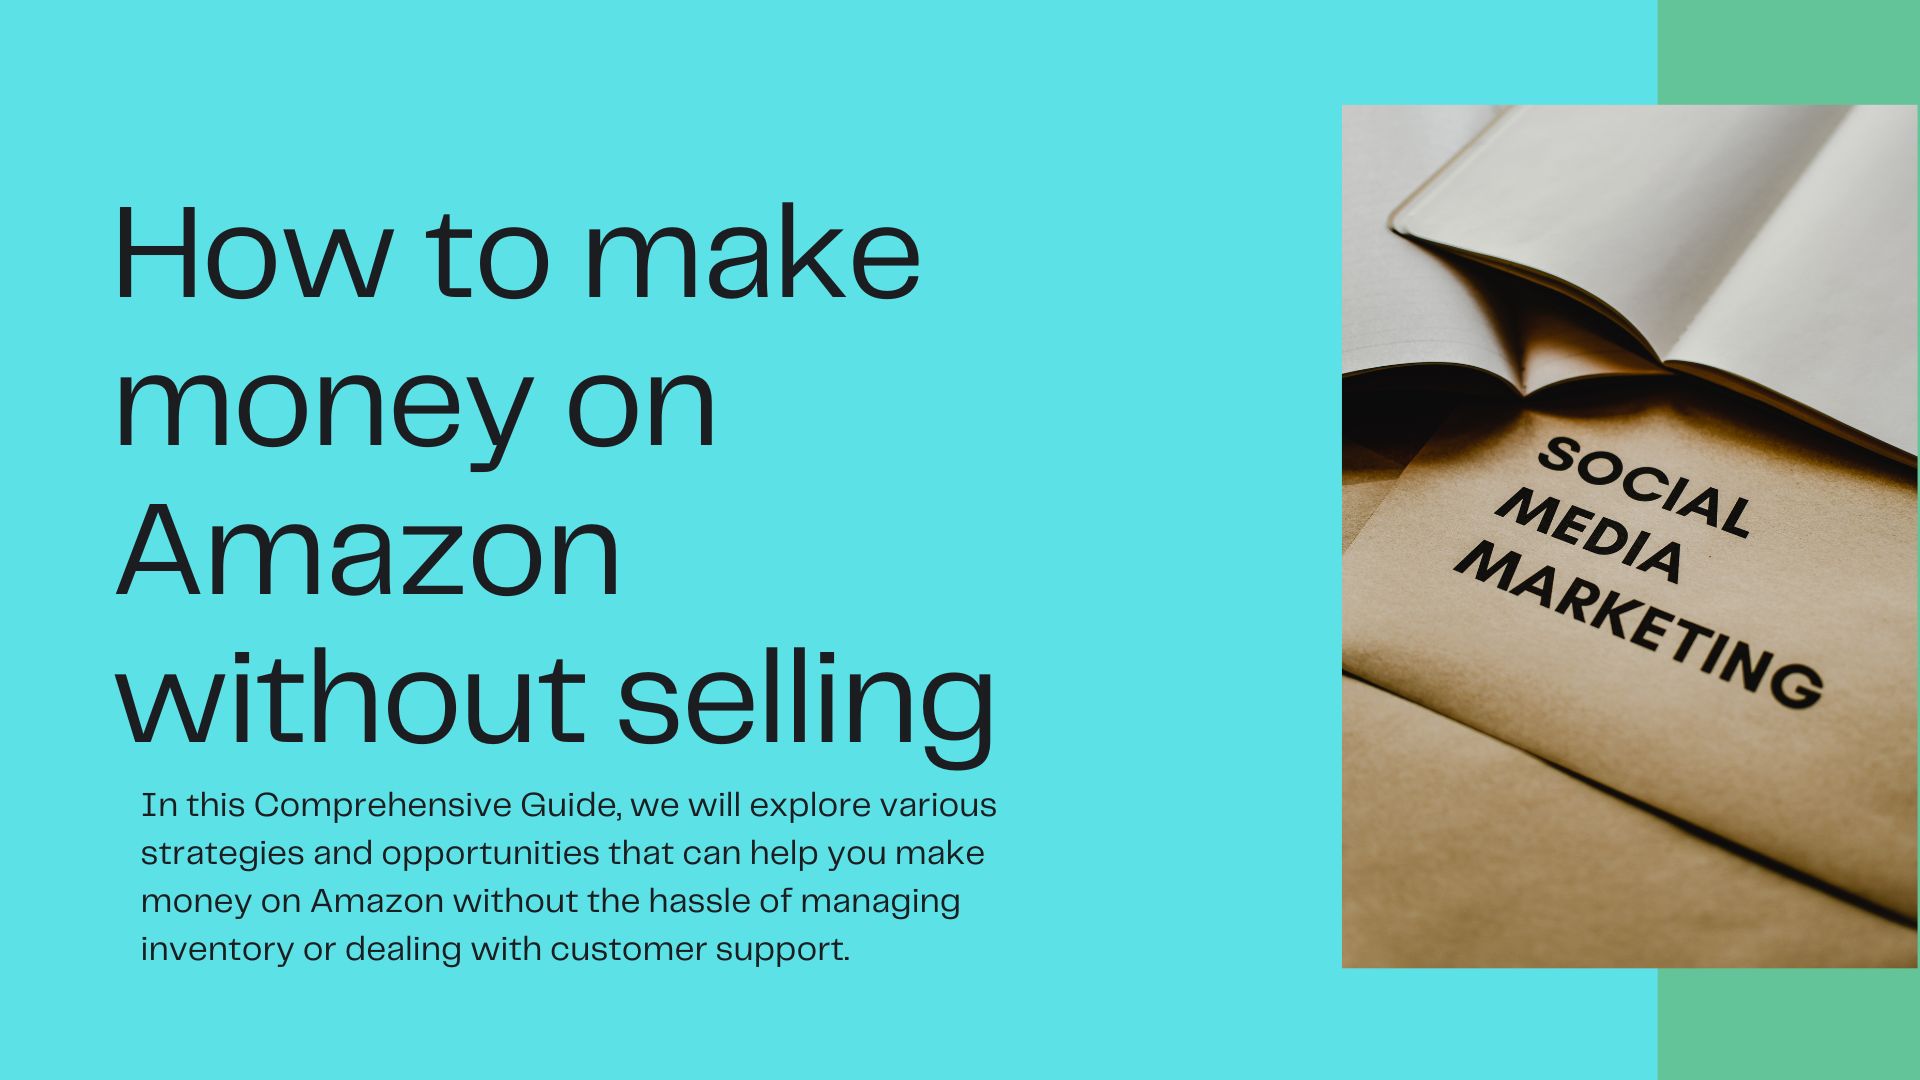 How to make money on Amazon without selling